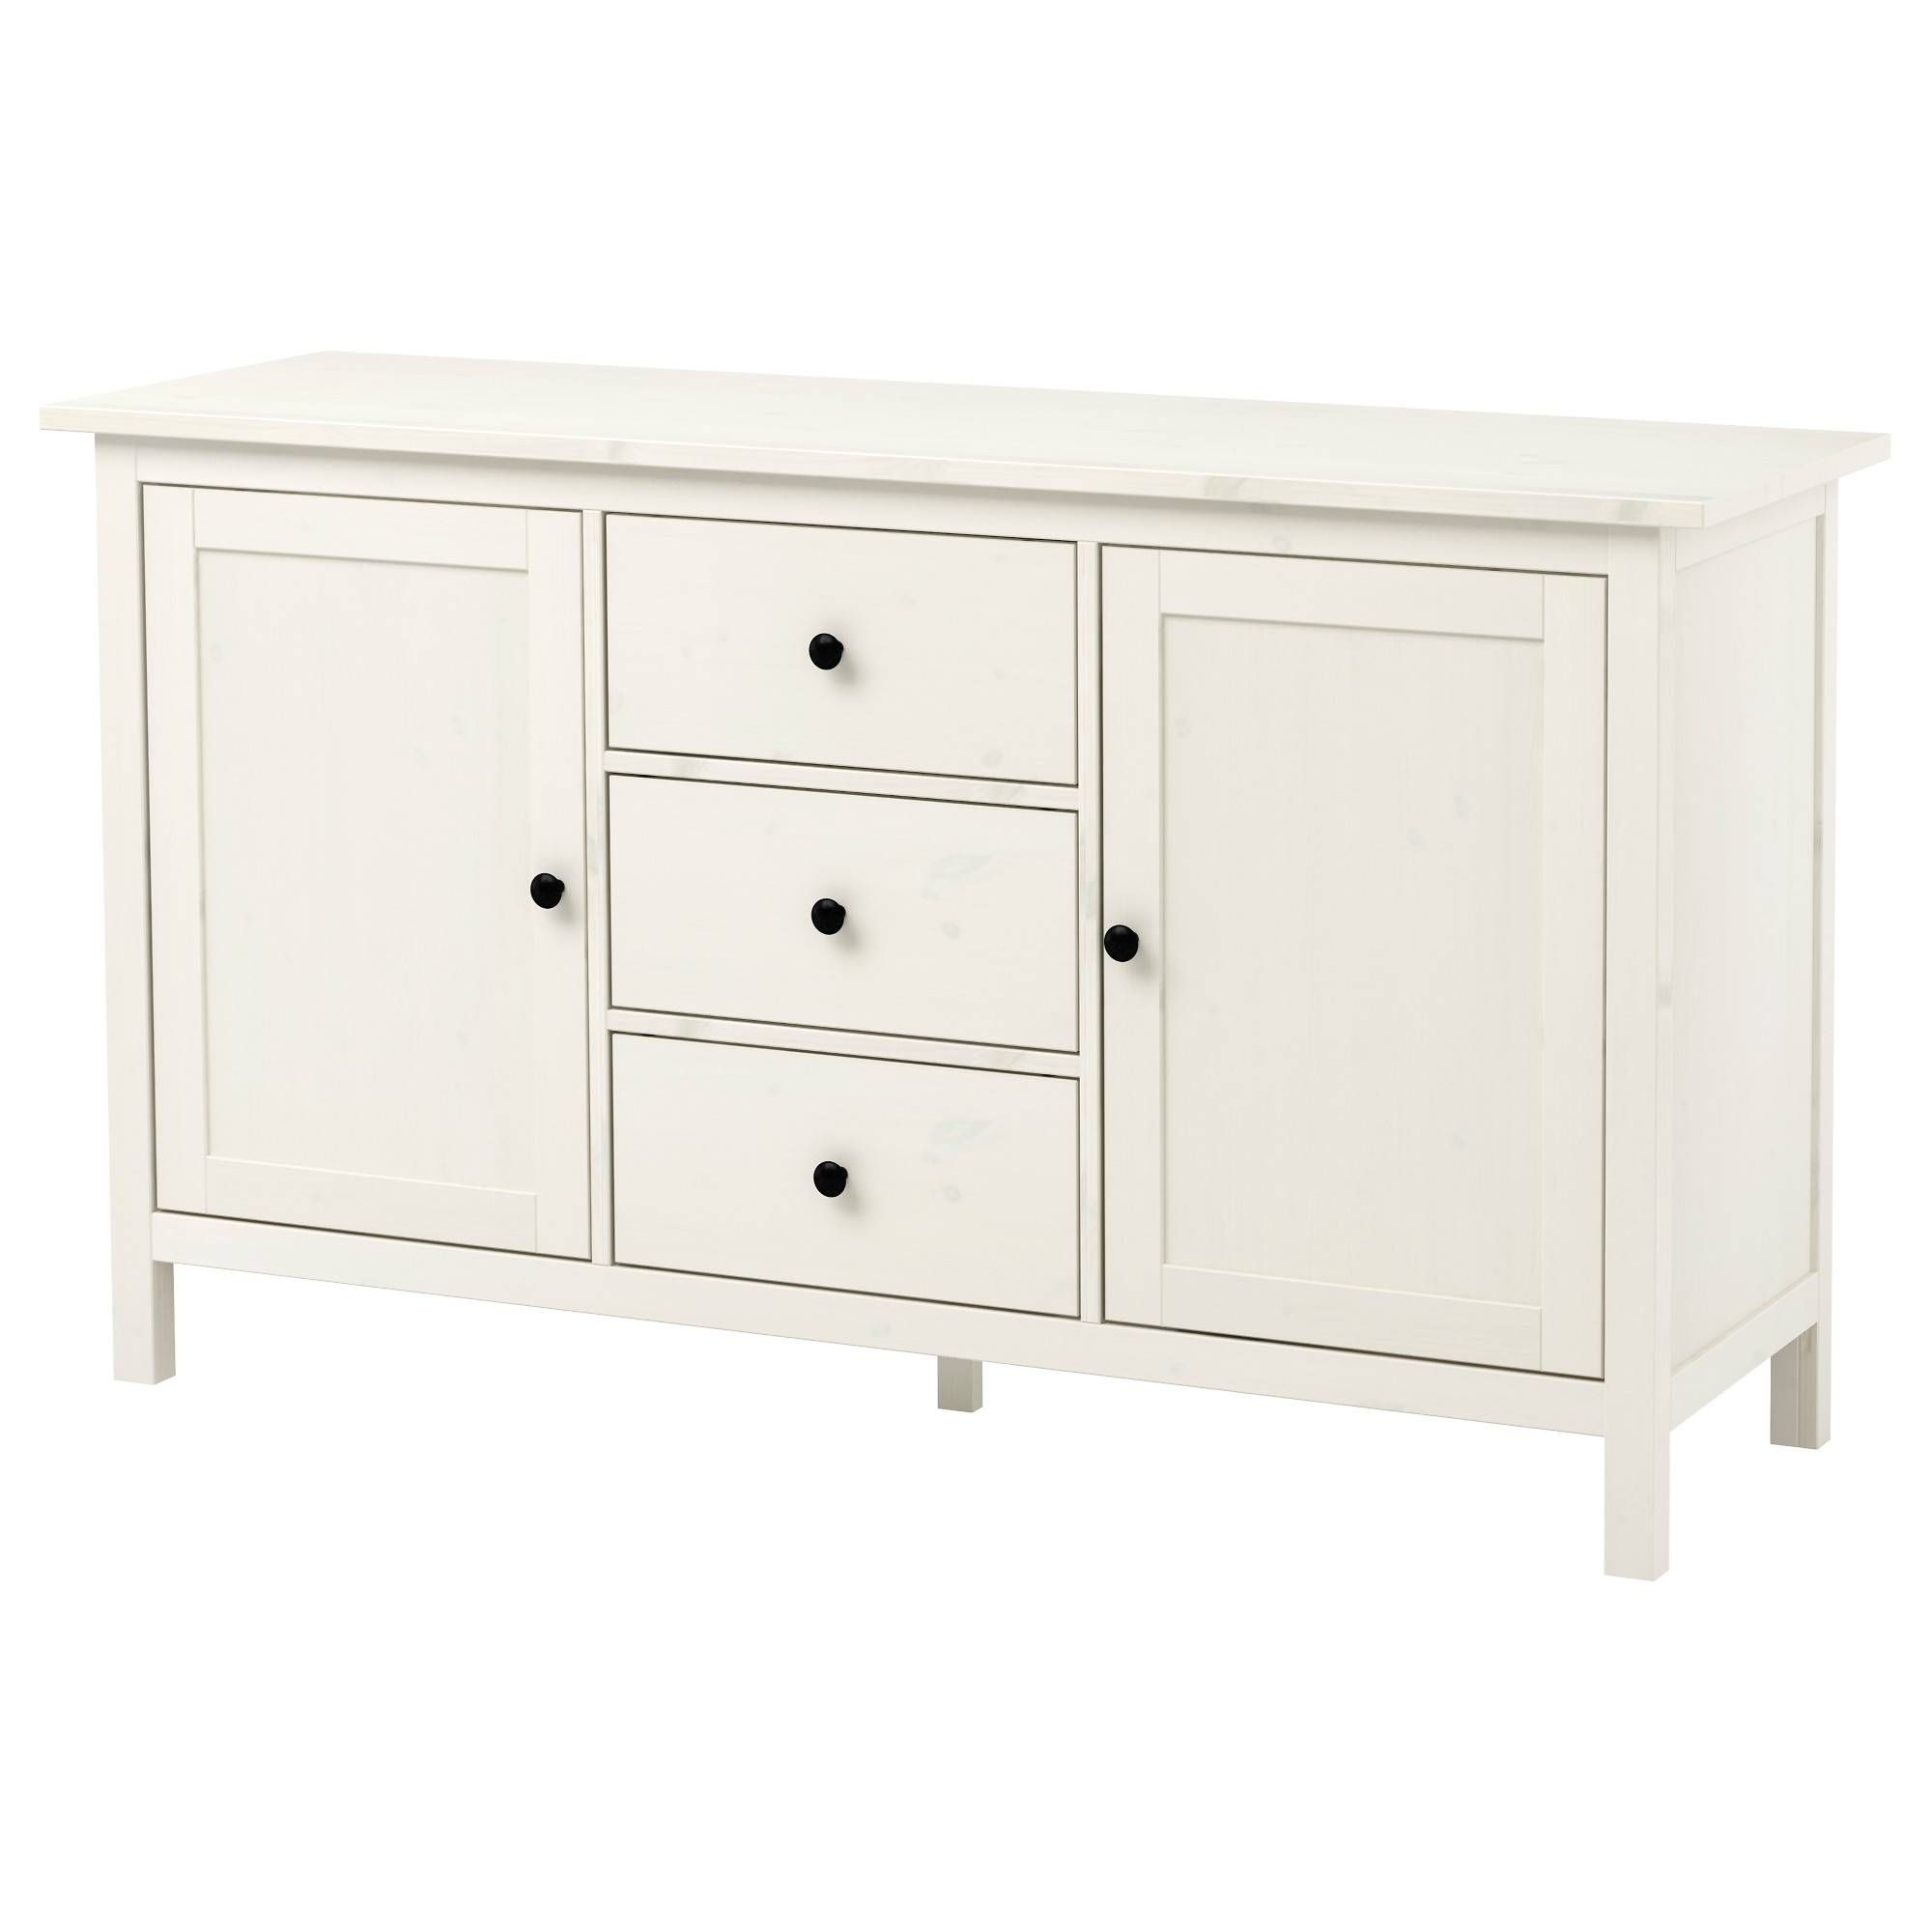 Sideboards & Buffet Cabinets | Ikea Pertaining To Narrow Kitchen Sideboards (View 4 of 15)